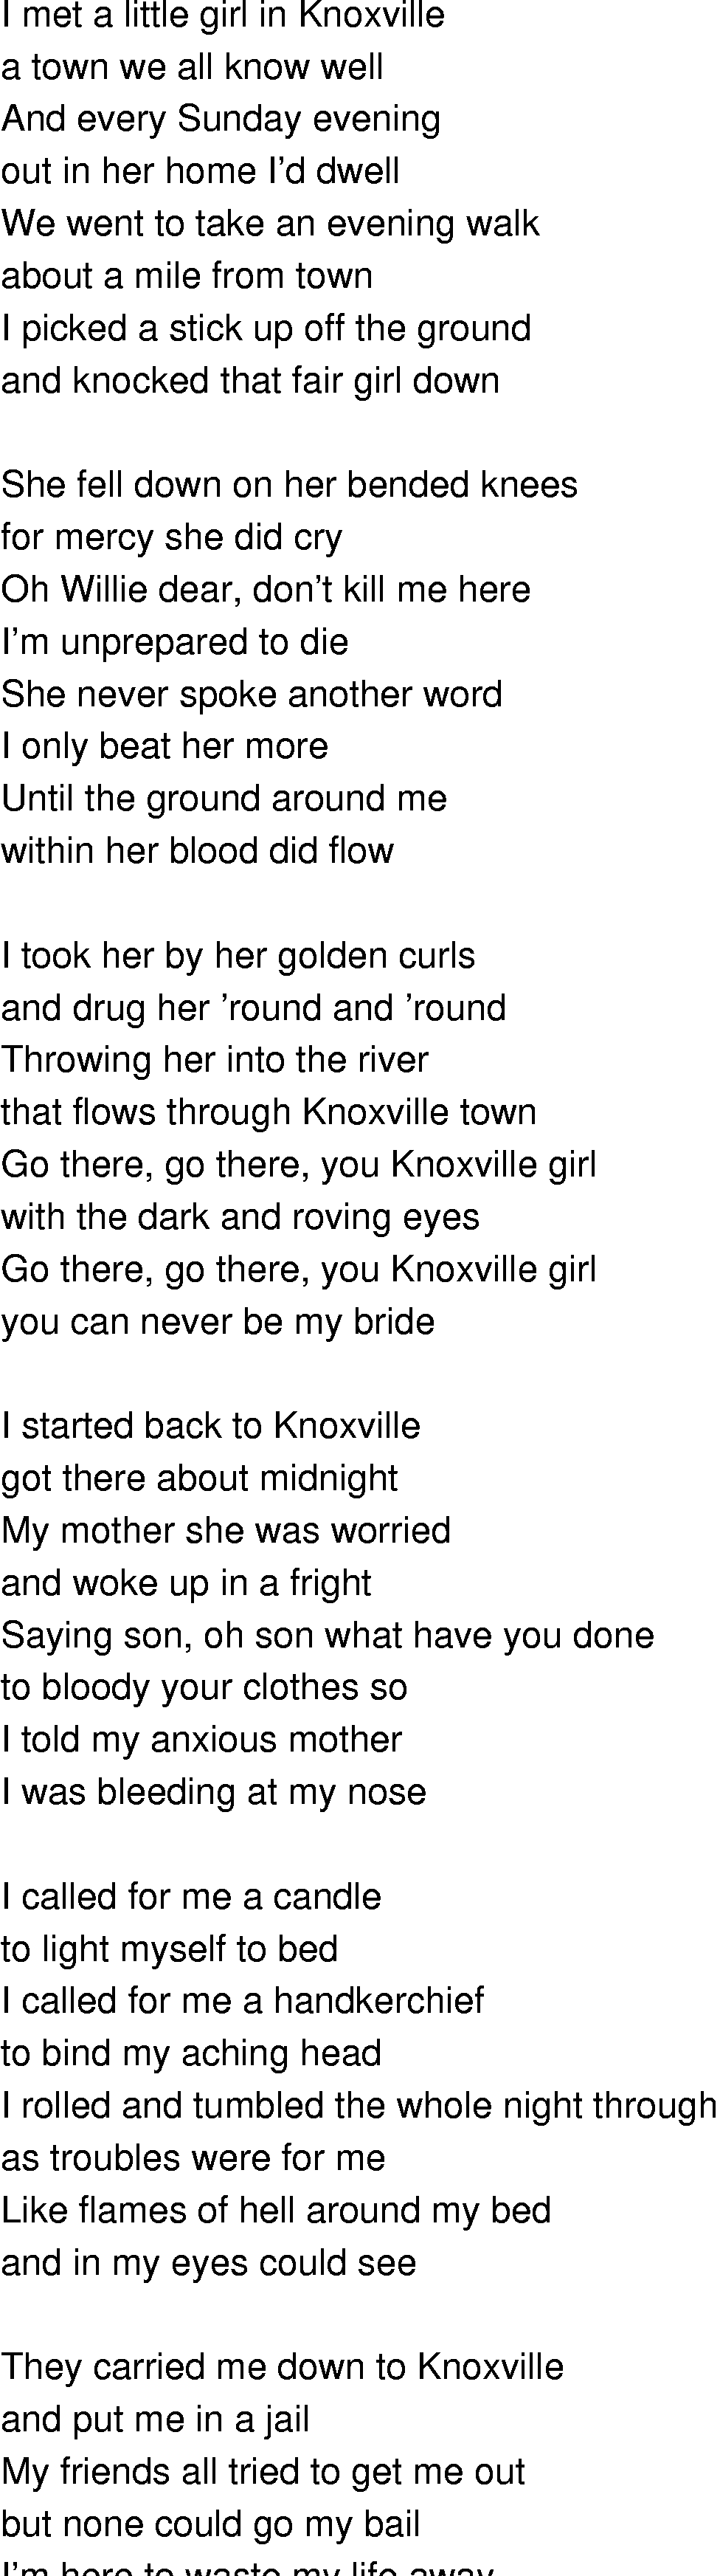 Old-Time (oldtimey) Song Lyrics - knoxville girl